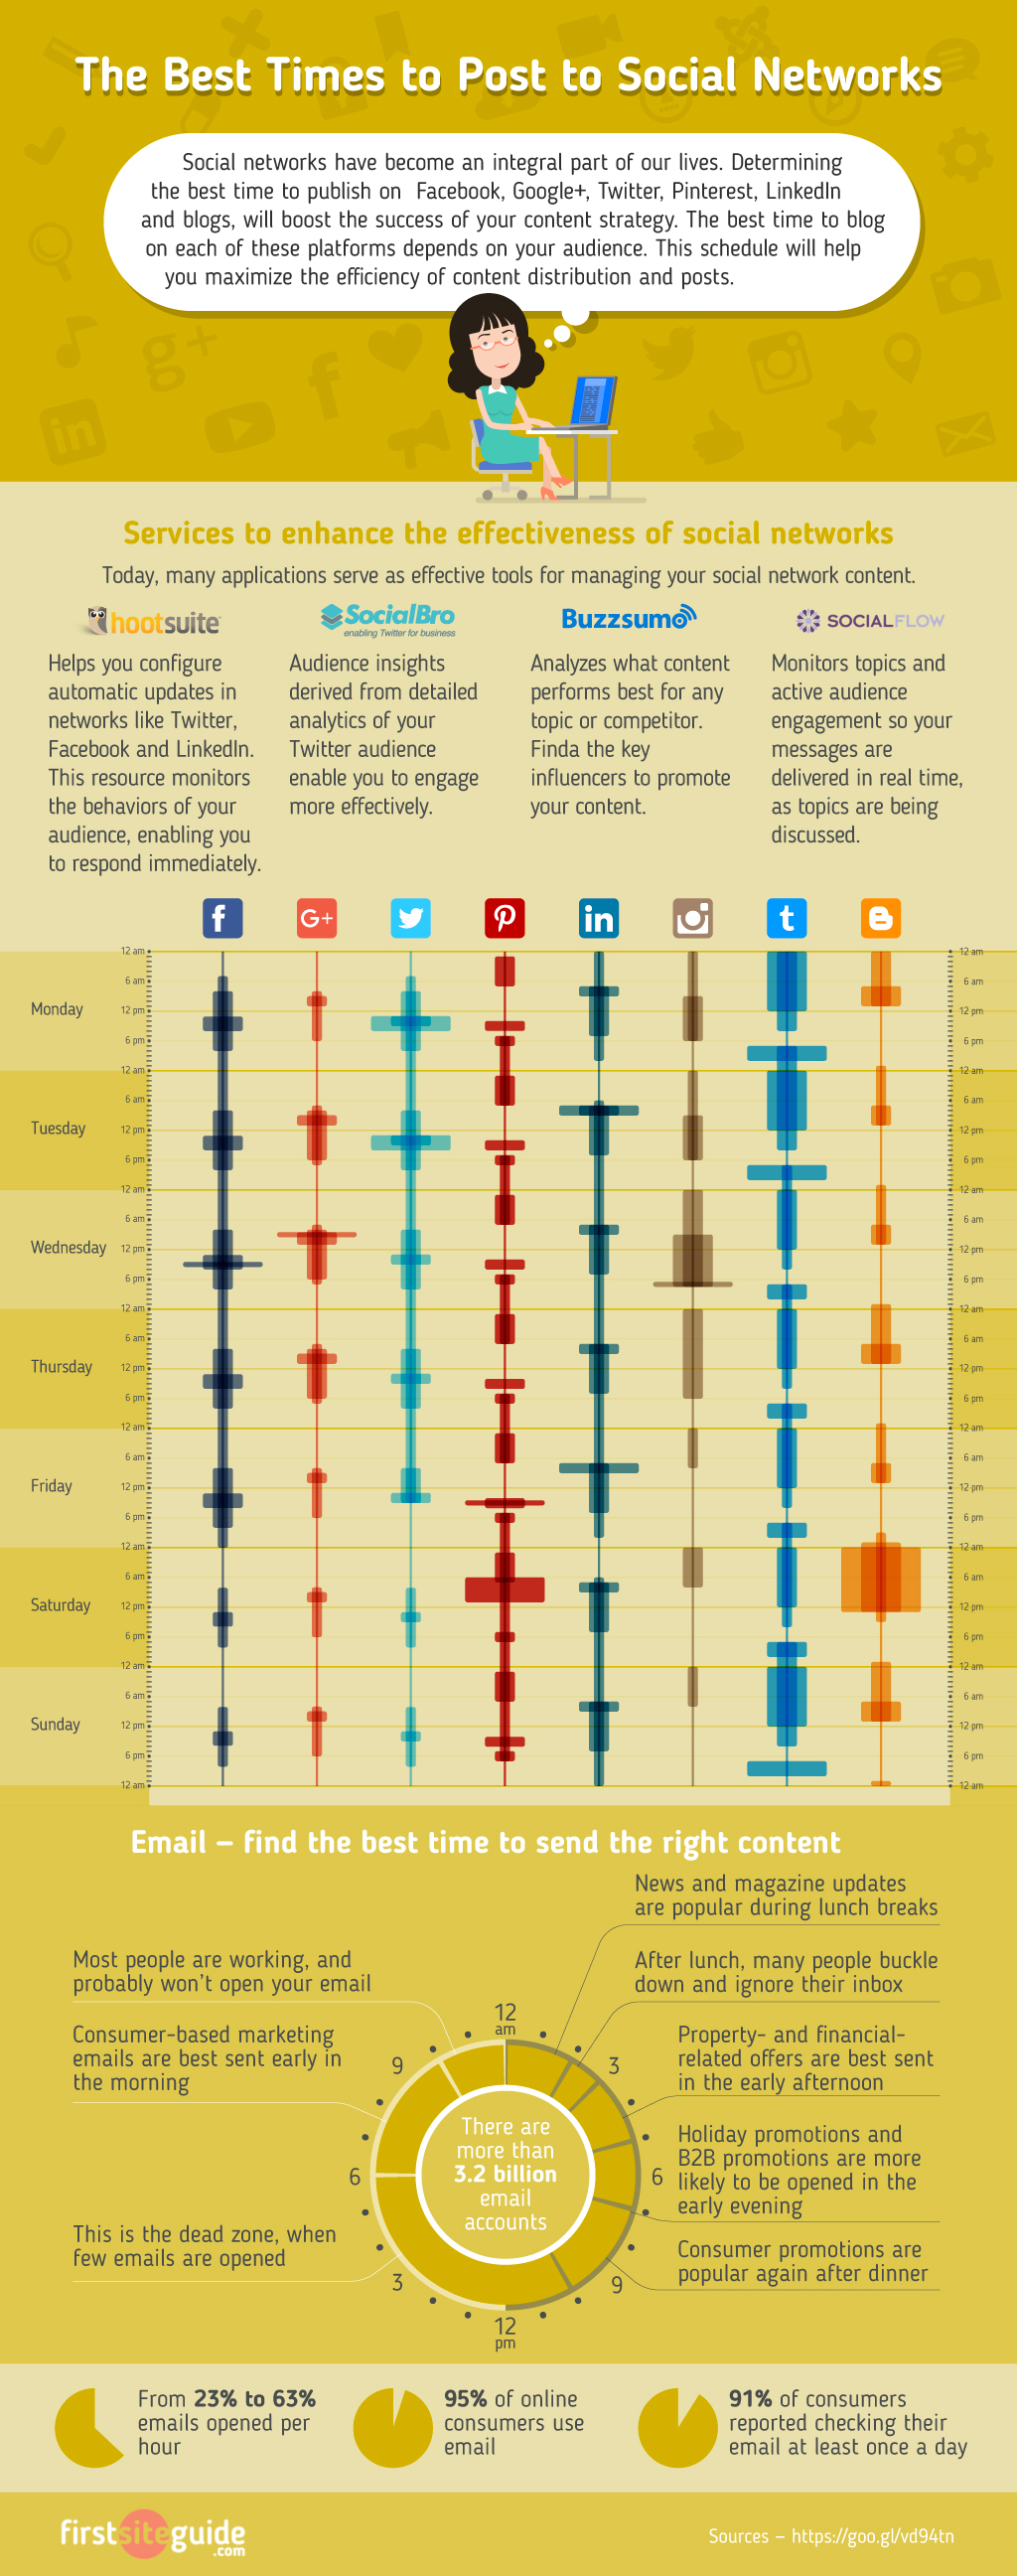 The Best Times to Post to Social Networks infographic